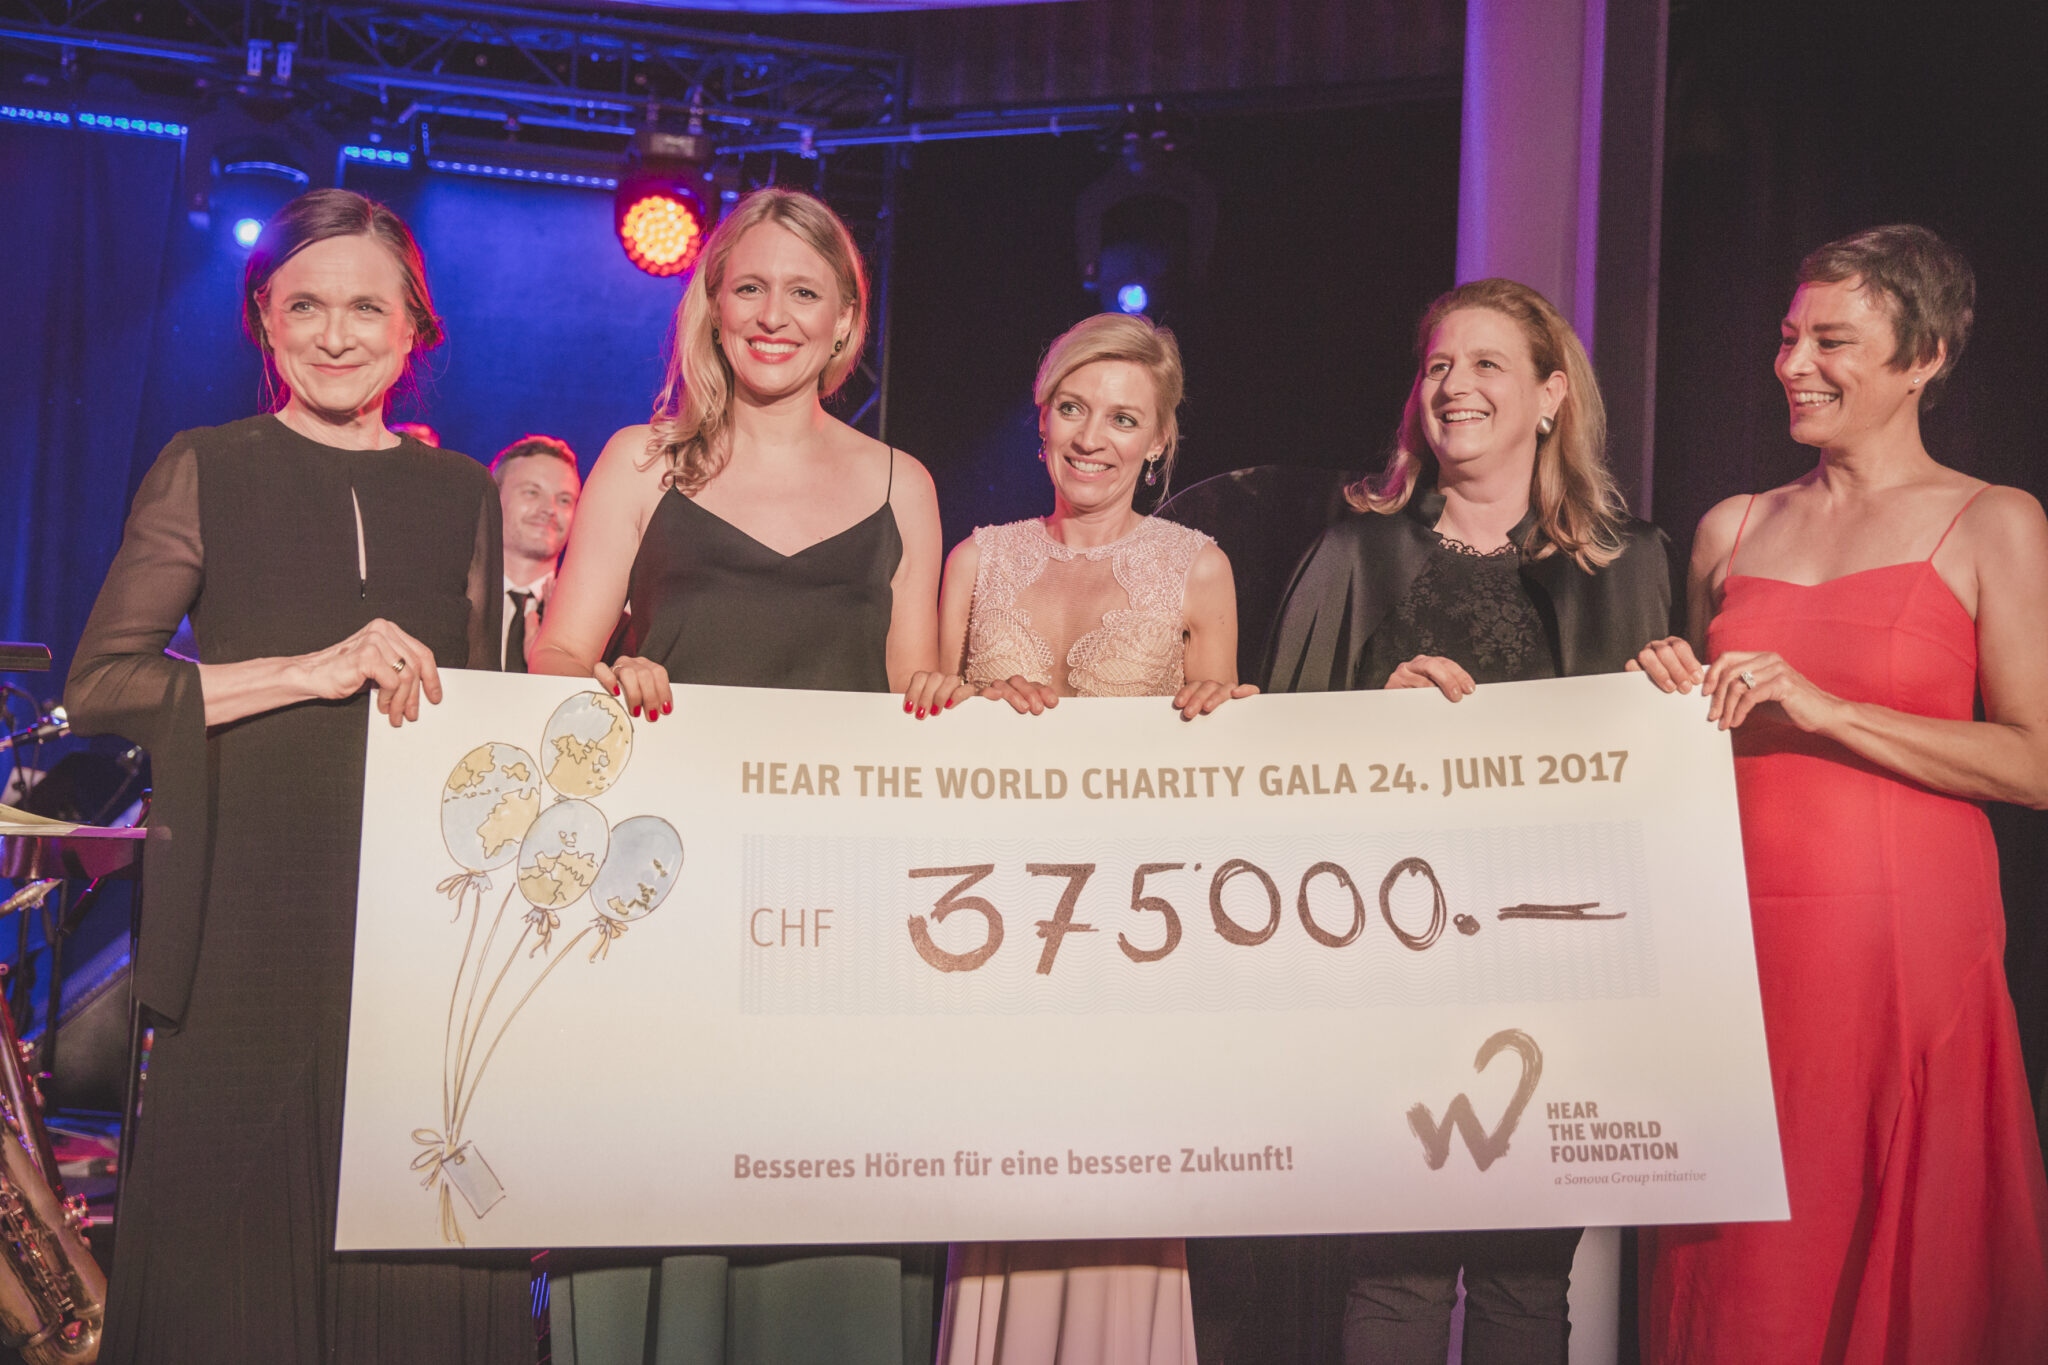 Hear the World Charity Gala: CHF 375,000 for children with hearing loss